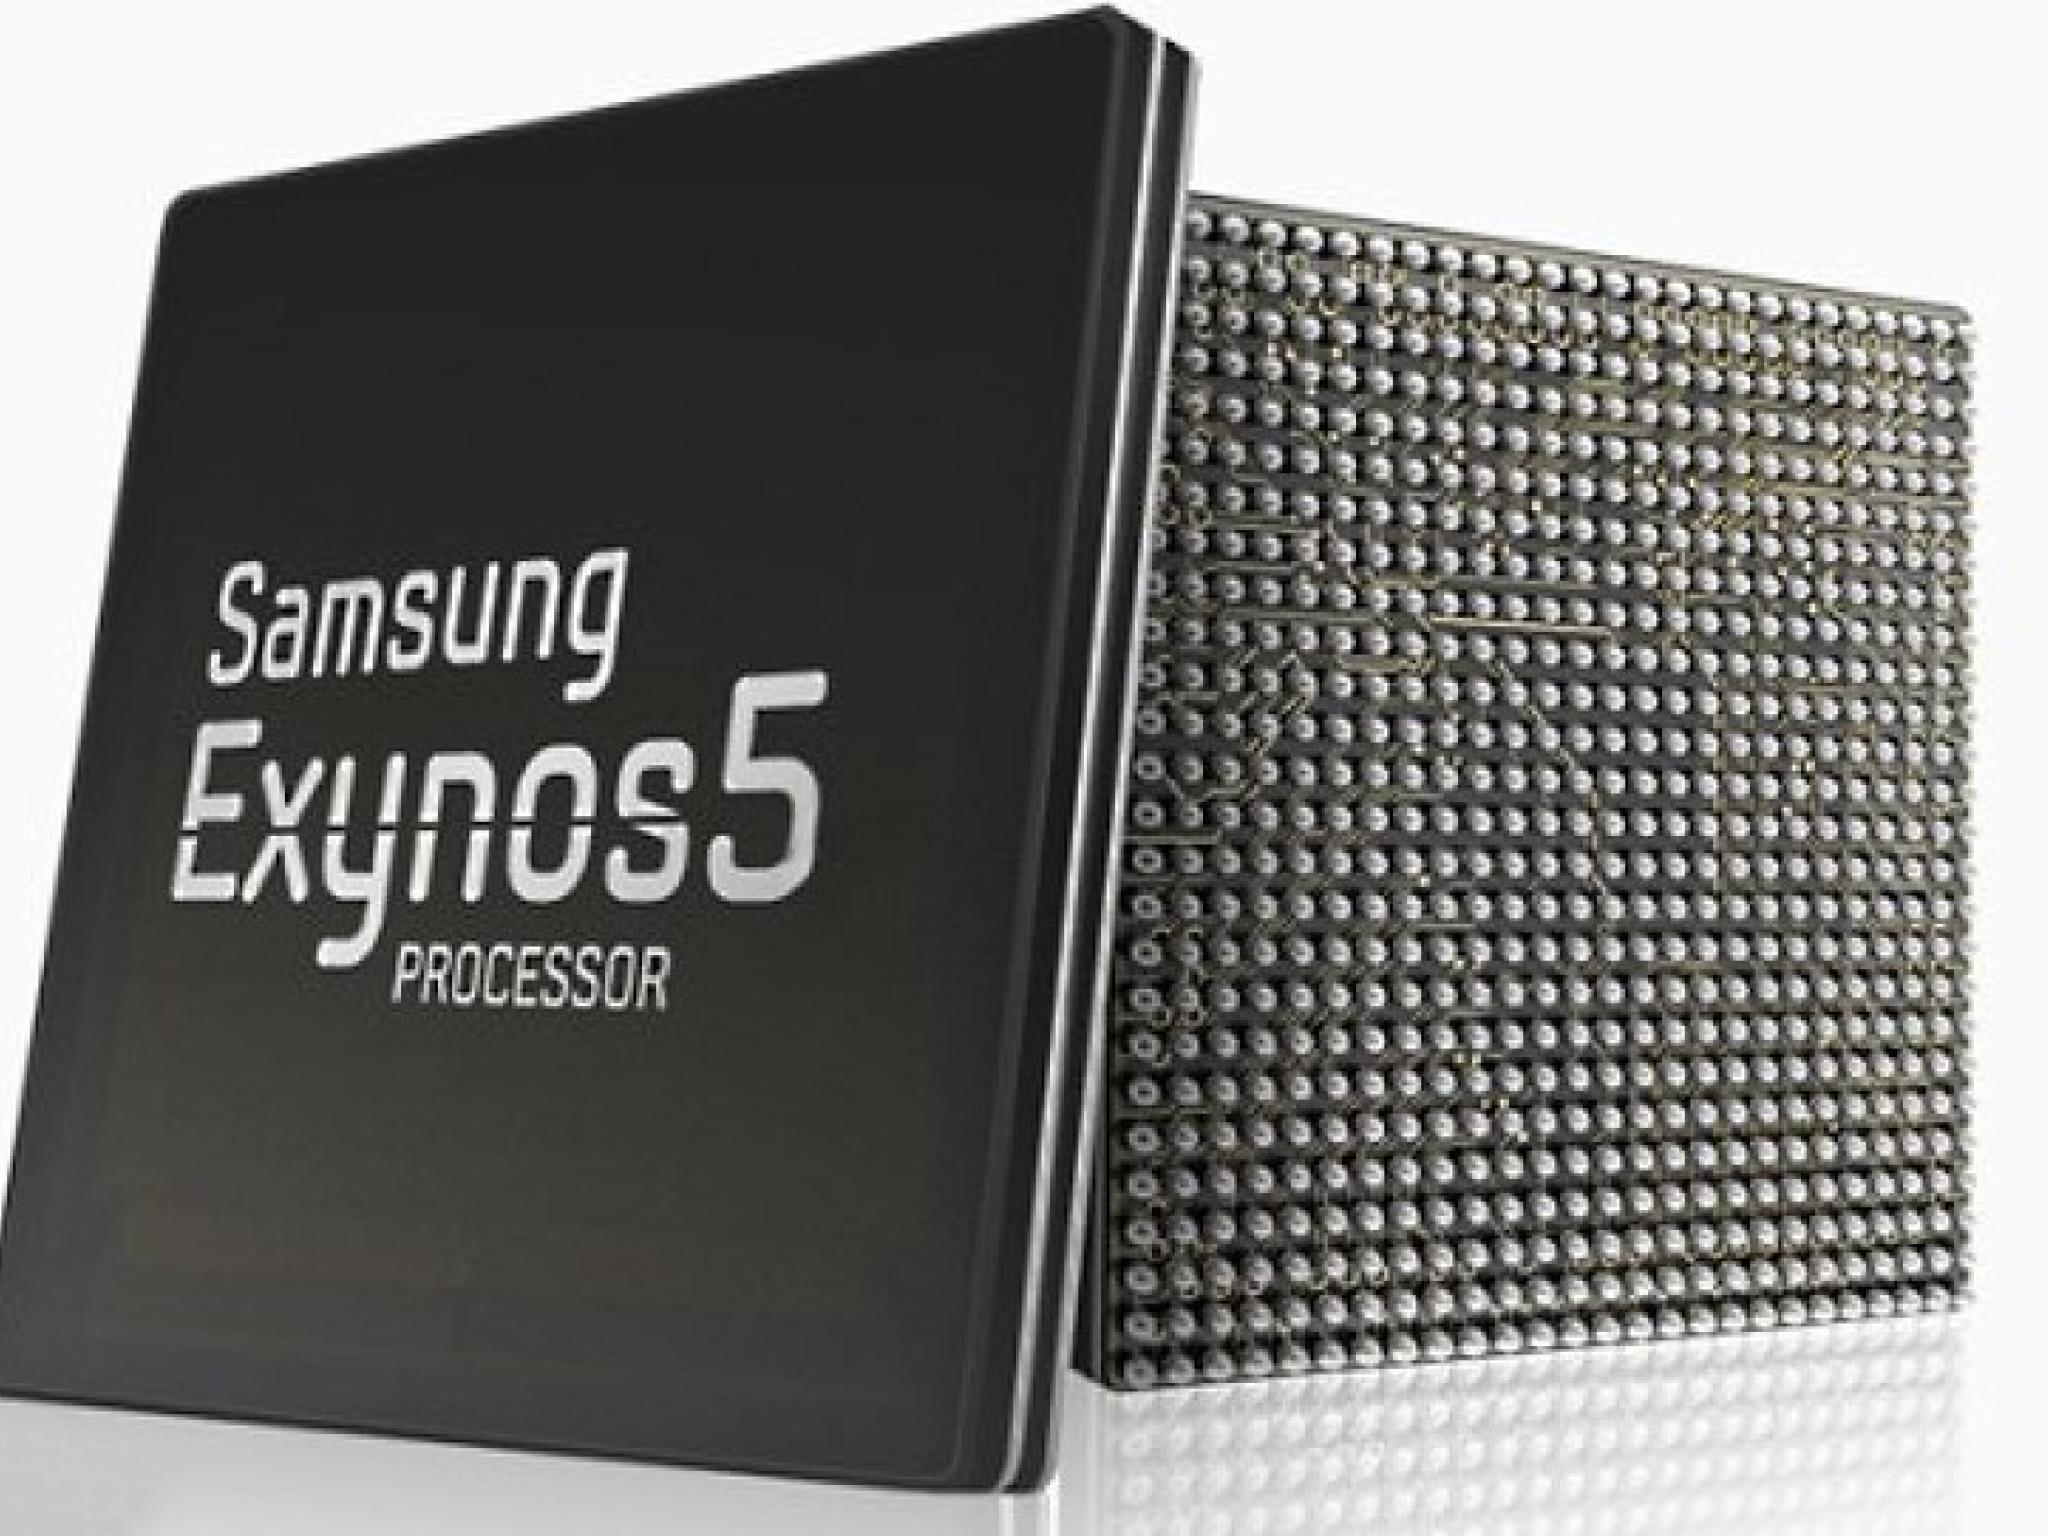  amd-and-samsung-partner-to-boos-mi350-chip-capabilities-with-advanced-memory-tech 